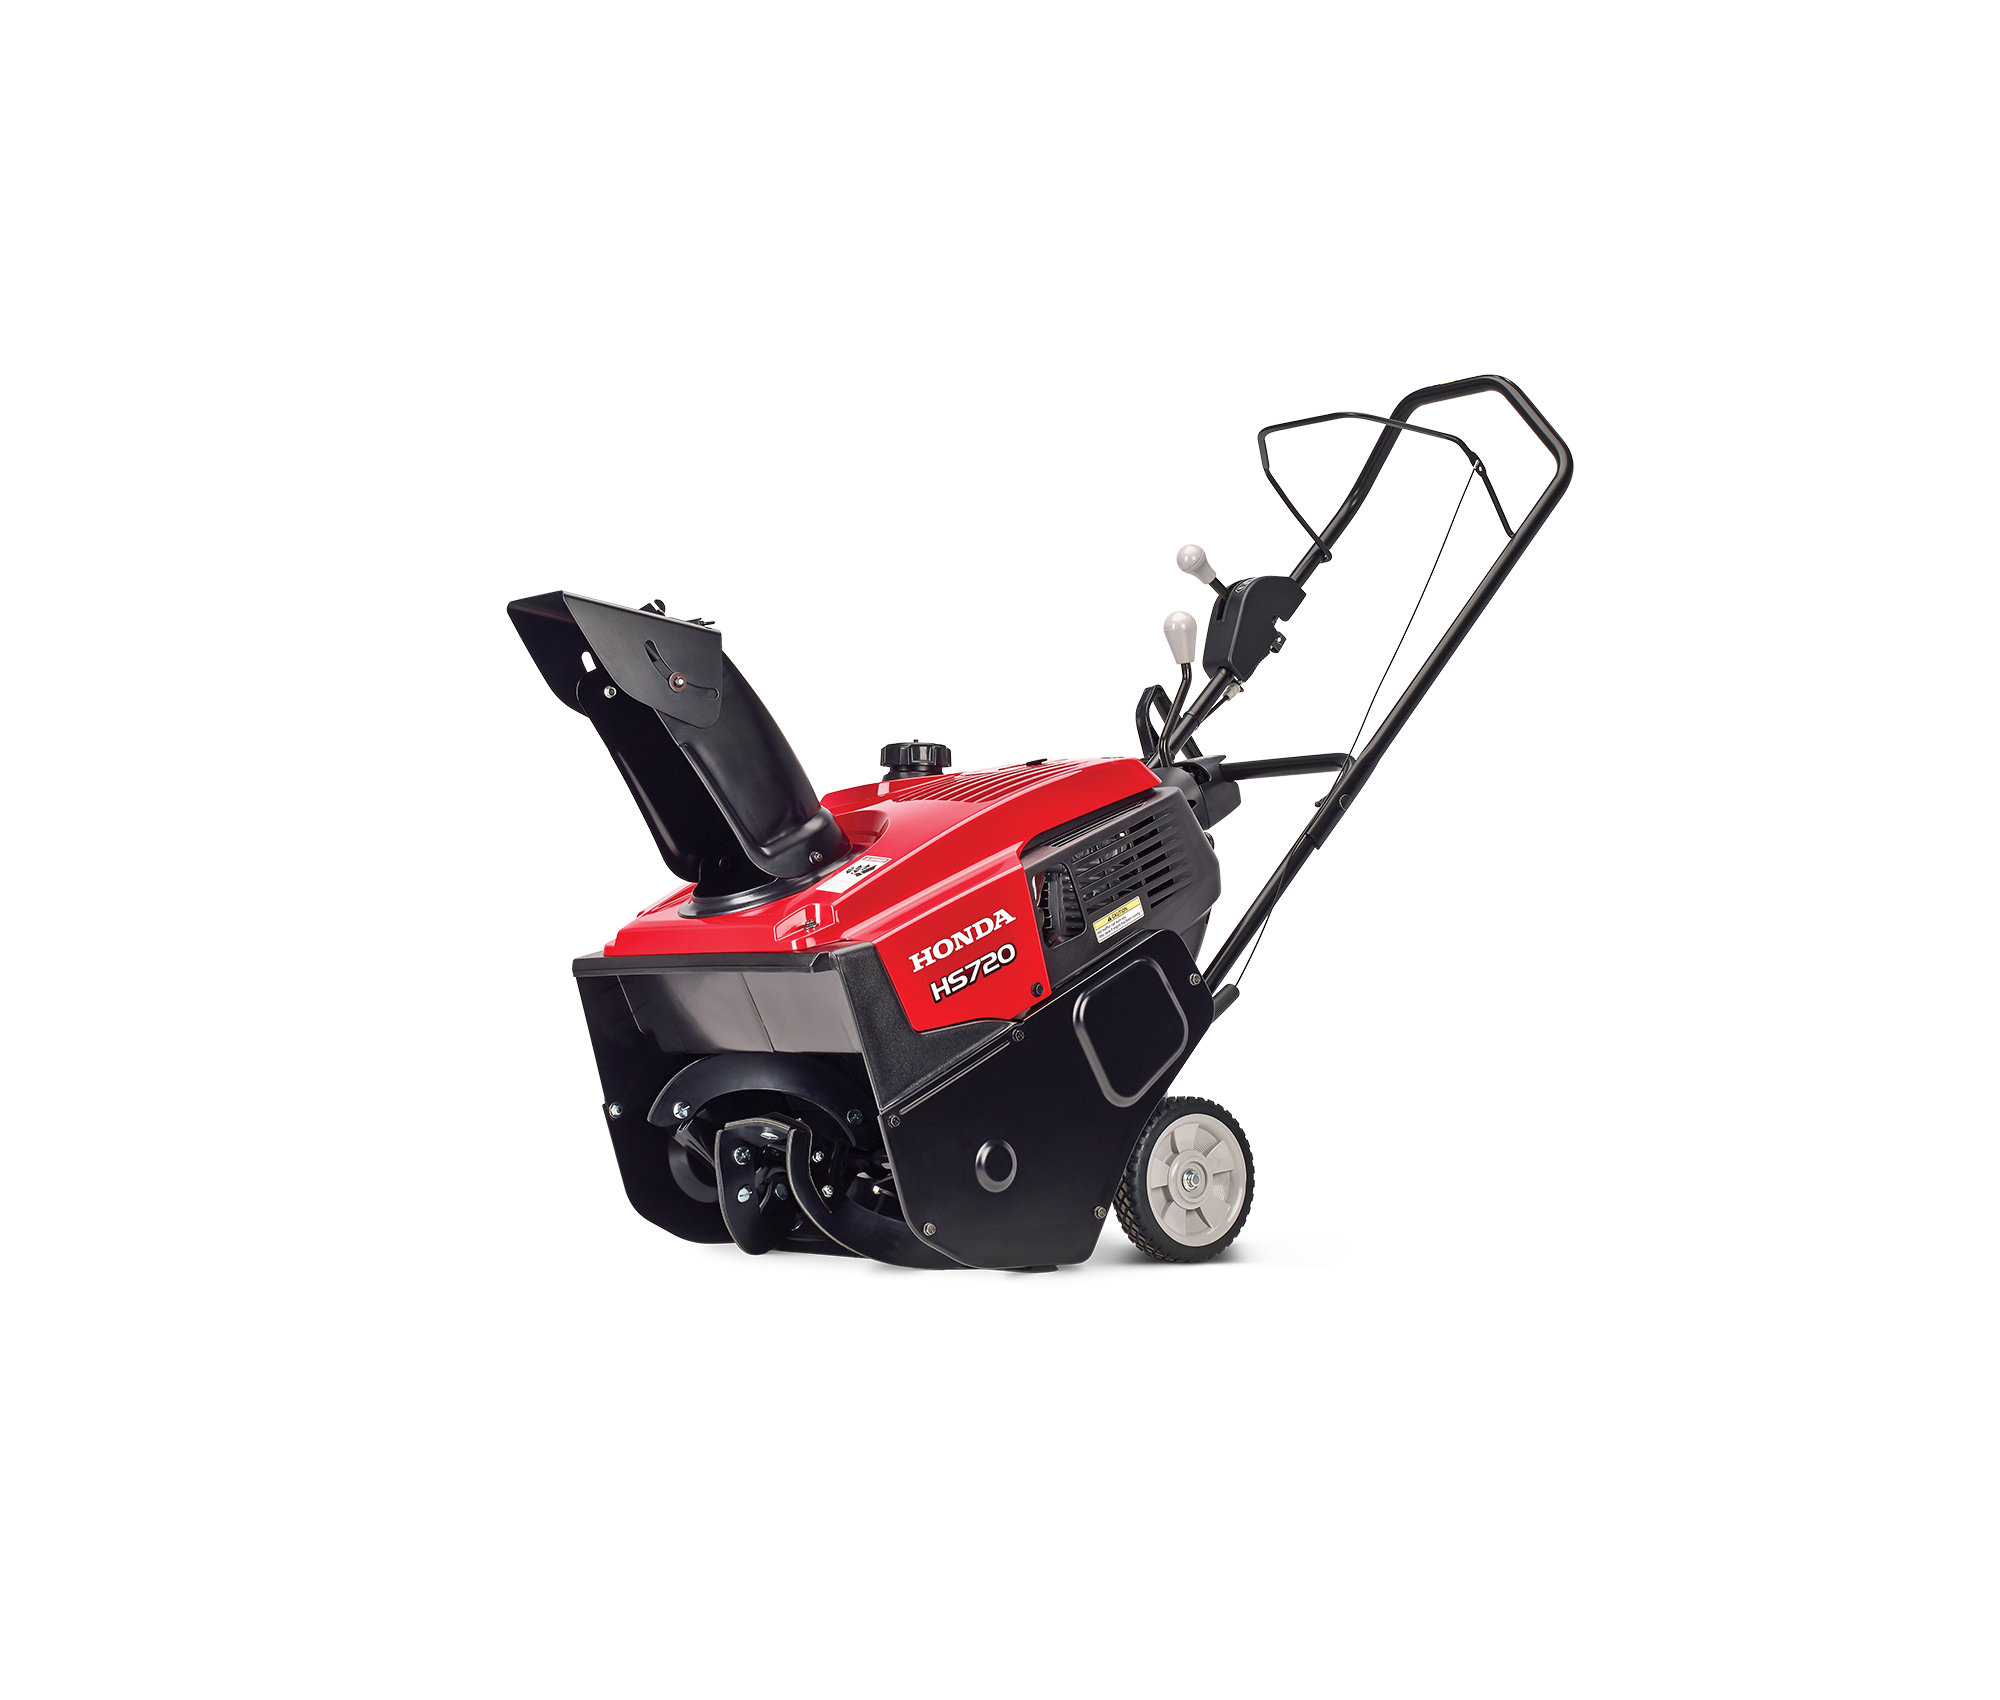 Image of the 20" Auger Assist Snowblower